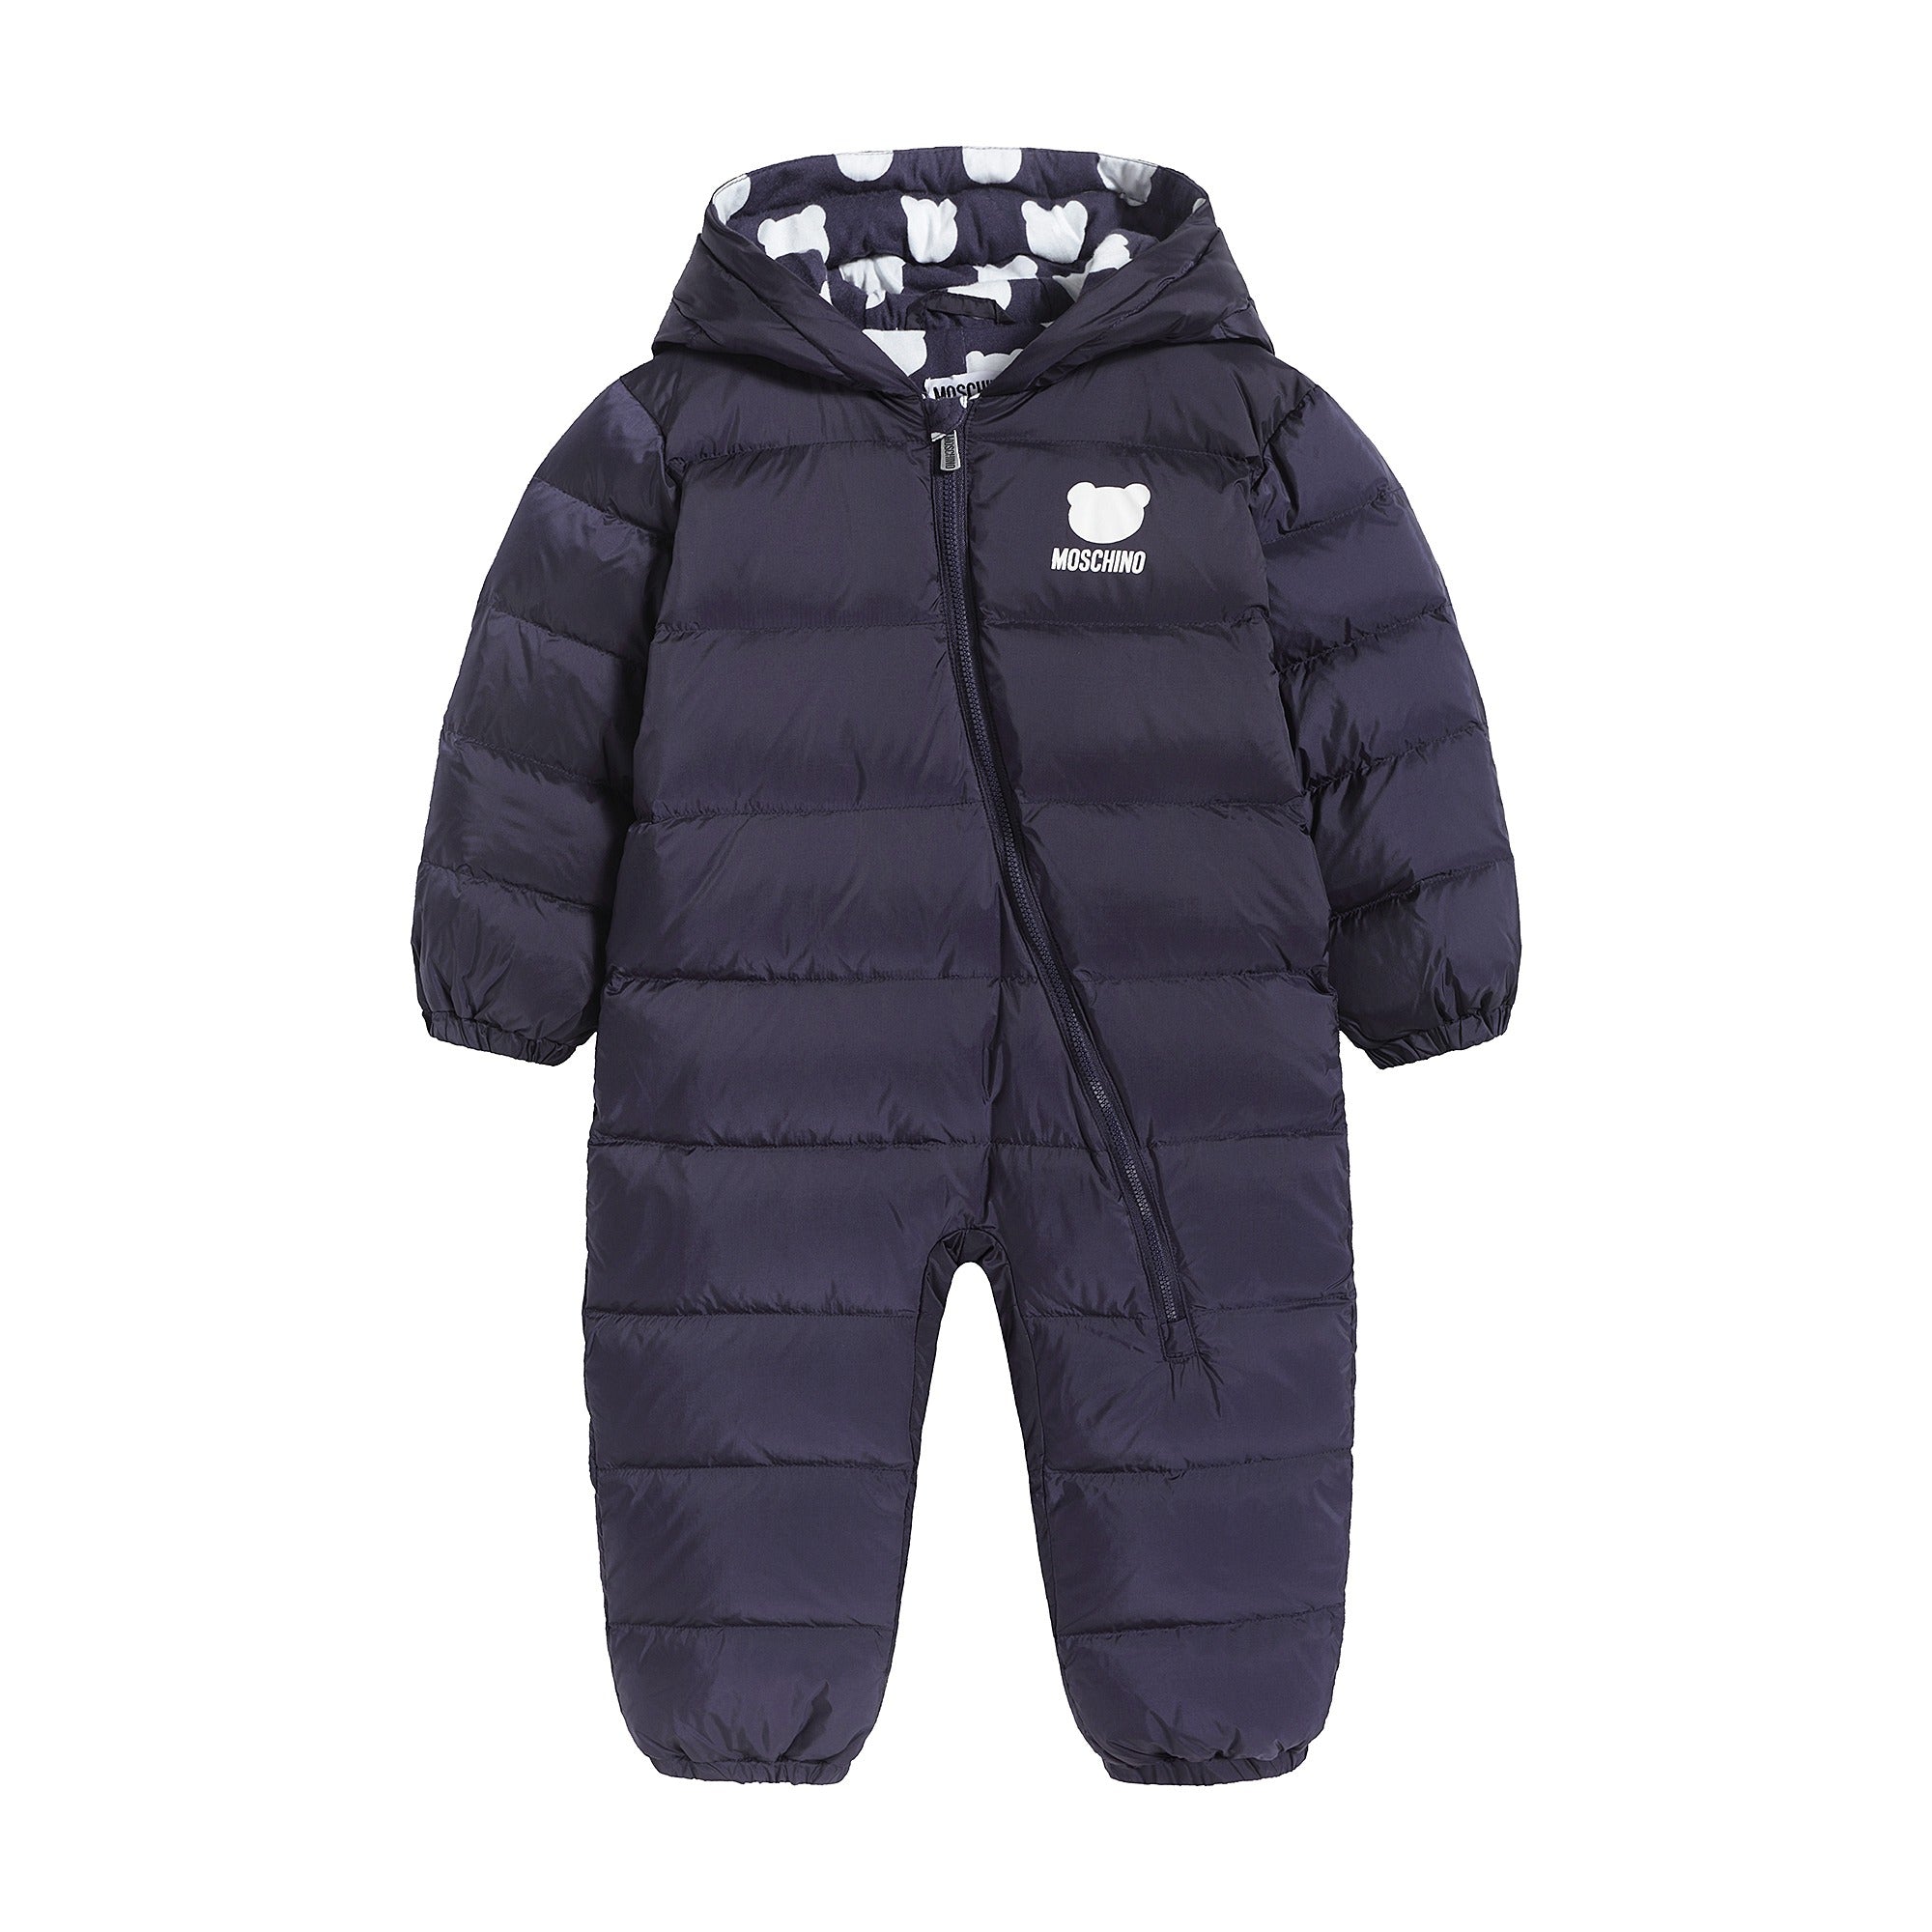 Baby Boys Navy Blue Padded Overalls